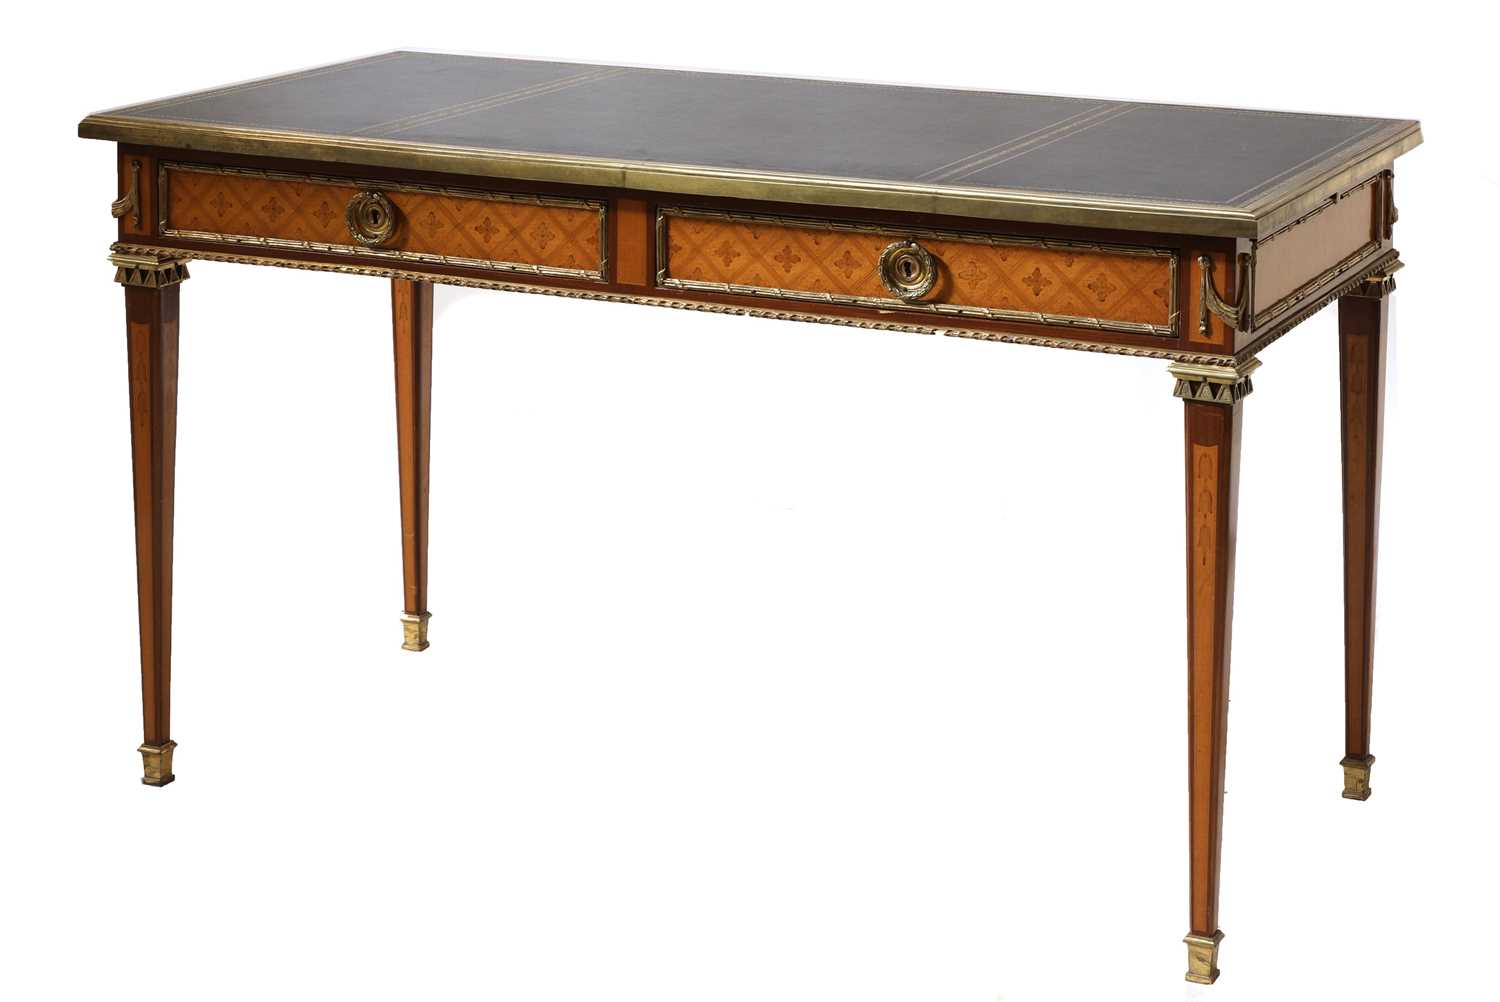 Lot 384 - A French Louis XVI-style mahogany, satinwood and gilt-metal mounted bureau plat